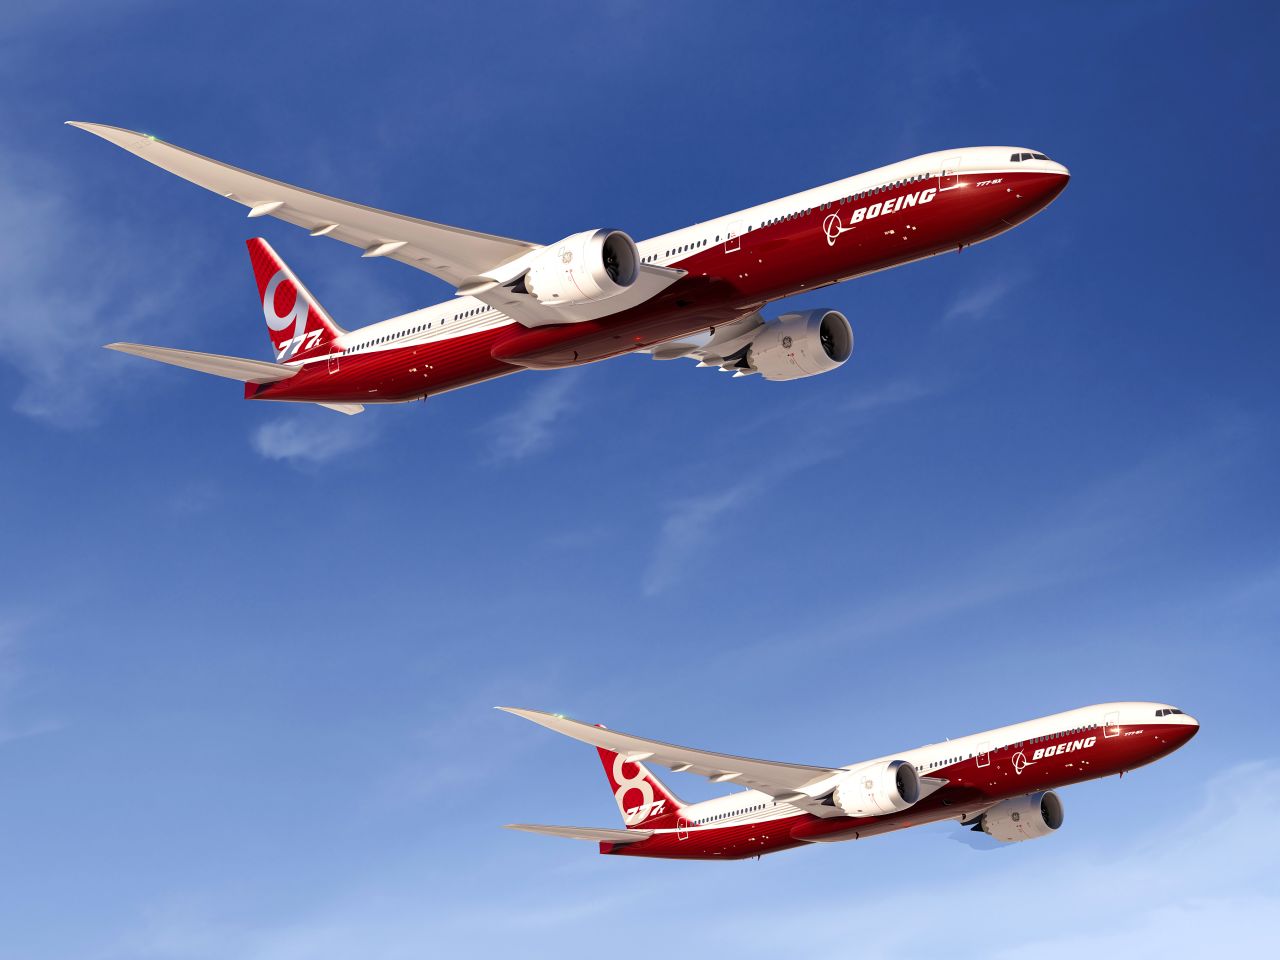 Boeing officially launched its 777X program in 2013 at the Dubai Air Show. The 9X version will have a range of over 14,075 kilometers (8,746 miles) and fit 400 passengers. Notable changes from the original 777 include a longer, composite wing and a new GE engine. Production is scheduled to begin in 2017 and first delivery is targeted for 2020.